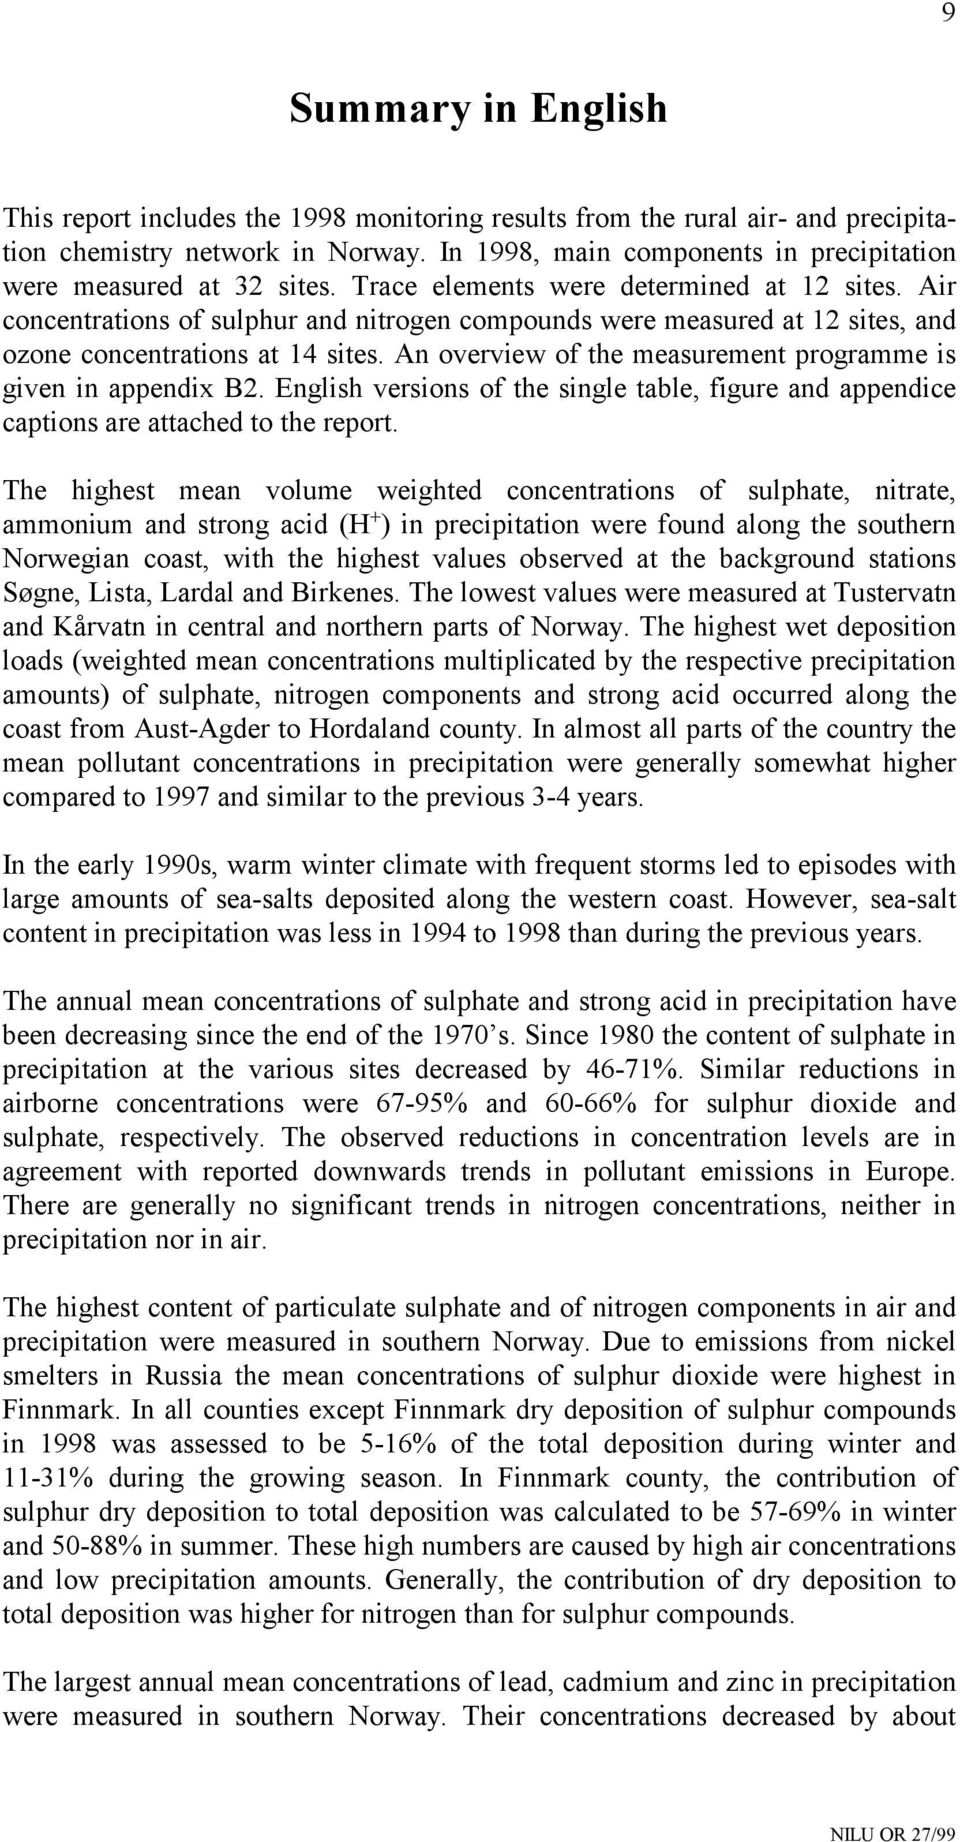 Air concentrations of sulphur and nitrogen compounds were measured at 12 sites, and ozone concentrations at 14 sites. An overview of the measurement programme is given in appendix B2.